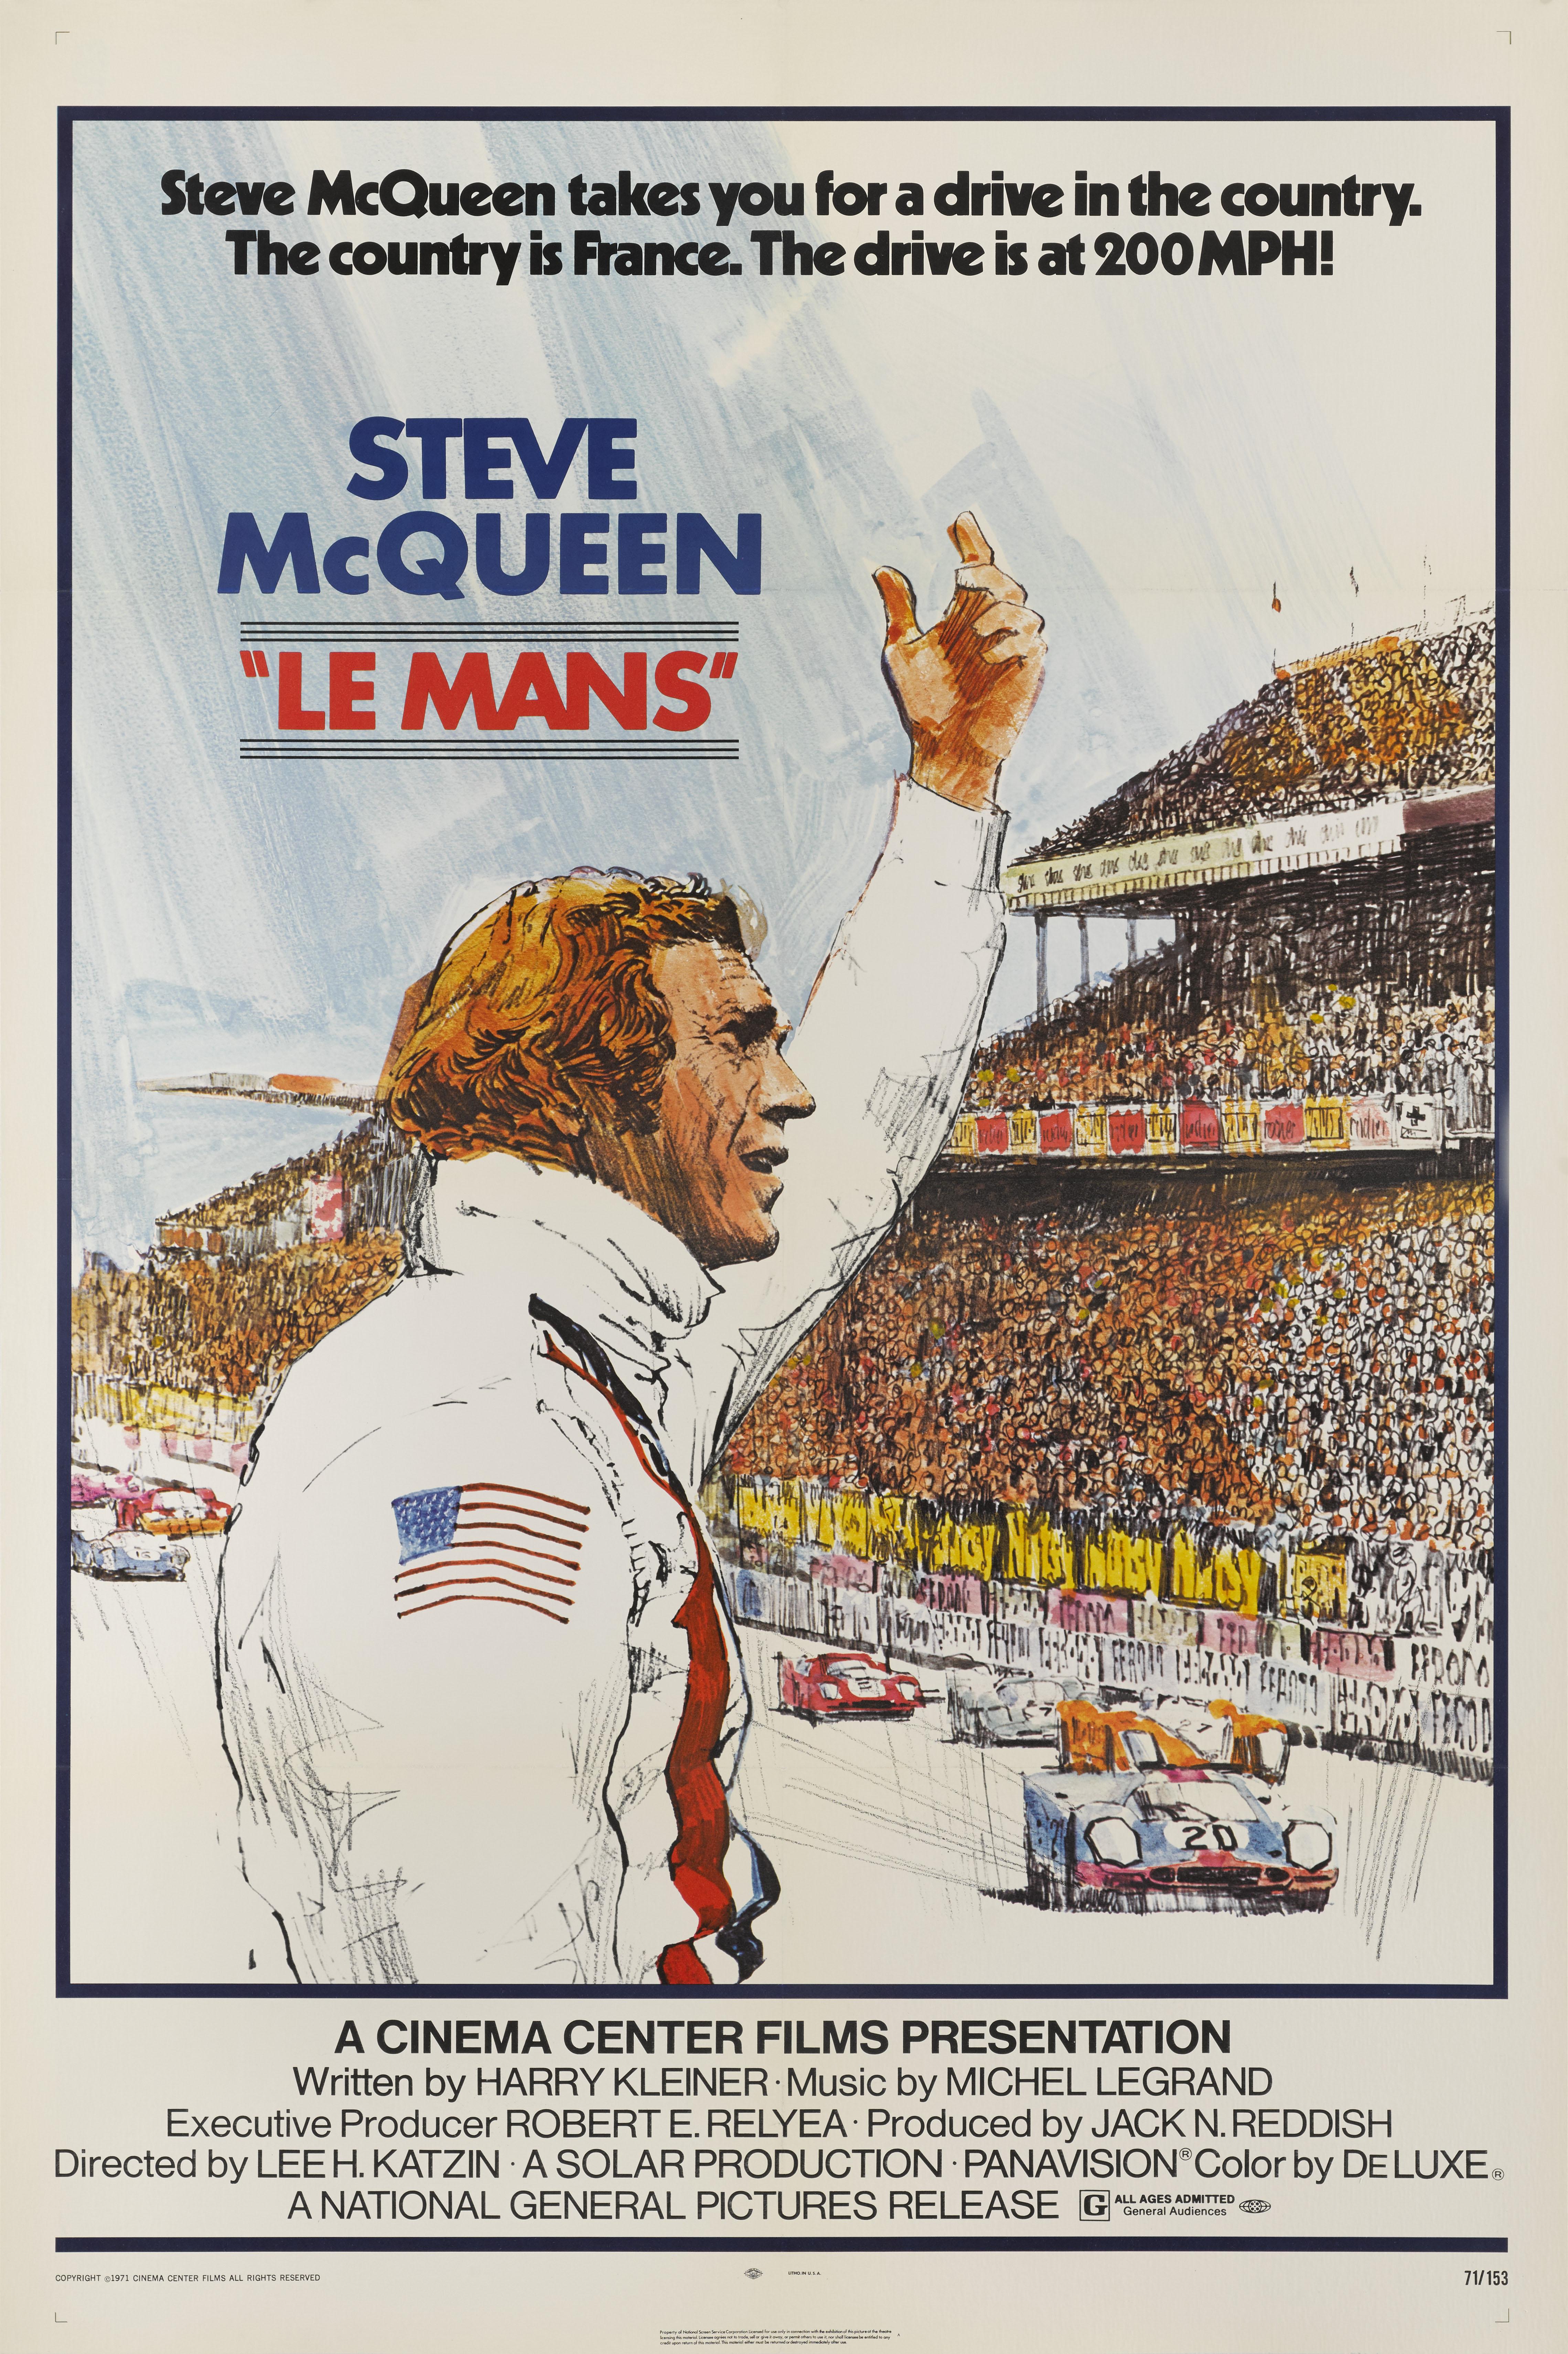 Original US film poster for Steve McQueen's Classic 1971 racing movie.
This film, directed by Lee H. Katzin, portrays the famous Le Mans 24 Hour endurance motor race, and stars Steve McQueen. It was shot on location at the Le Mans circuit between